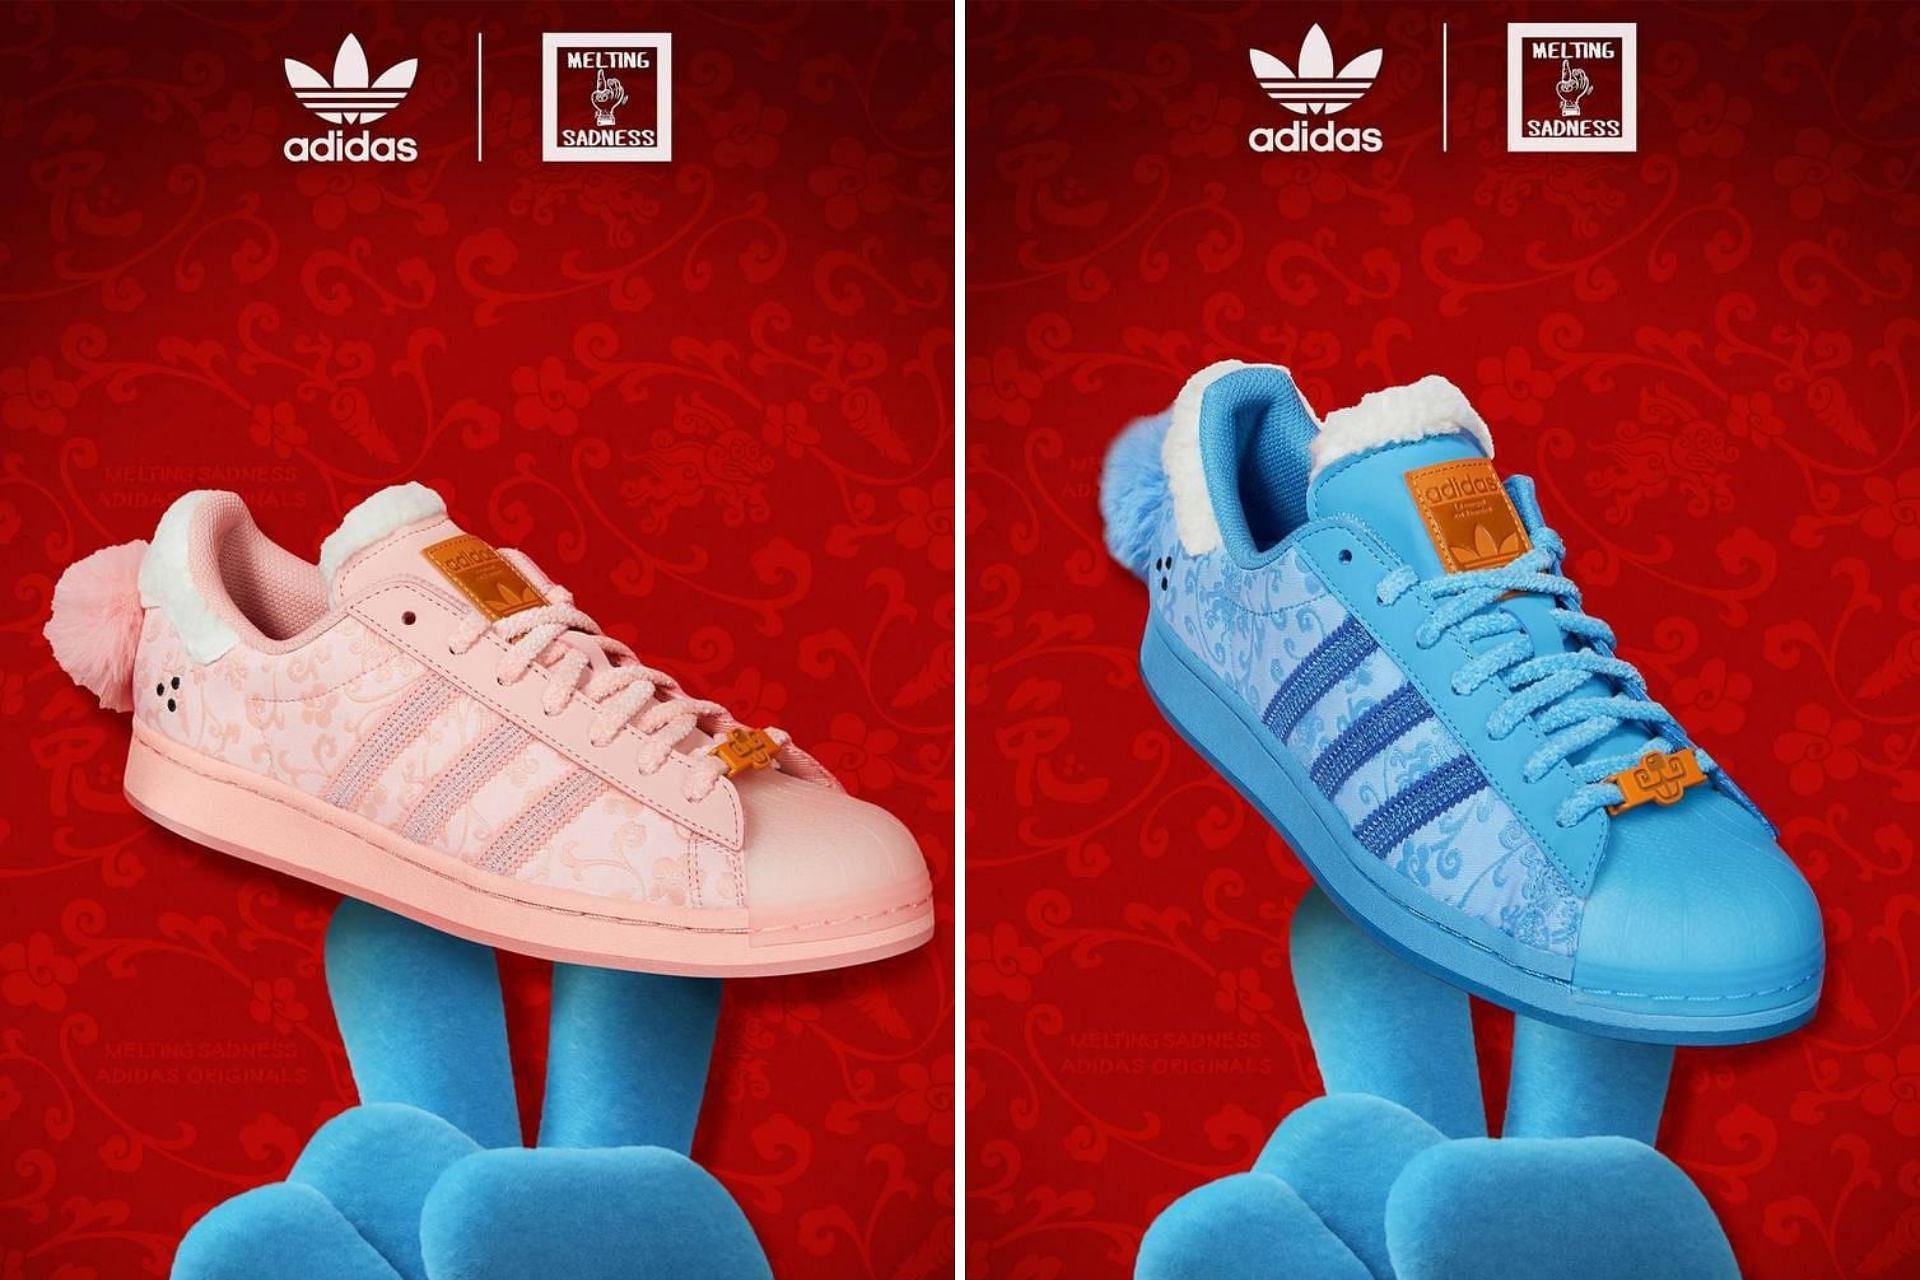 The Superstar shoes are offered in two colorways (Image via Melting Sadness)